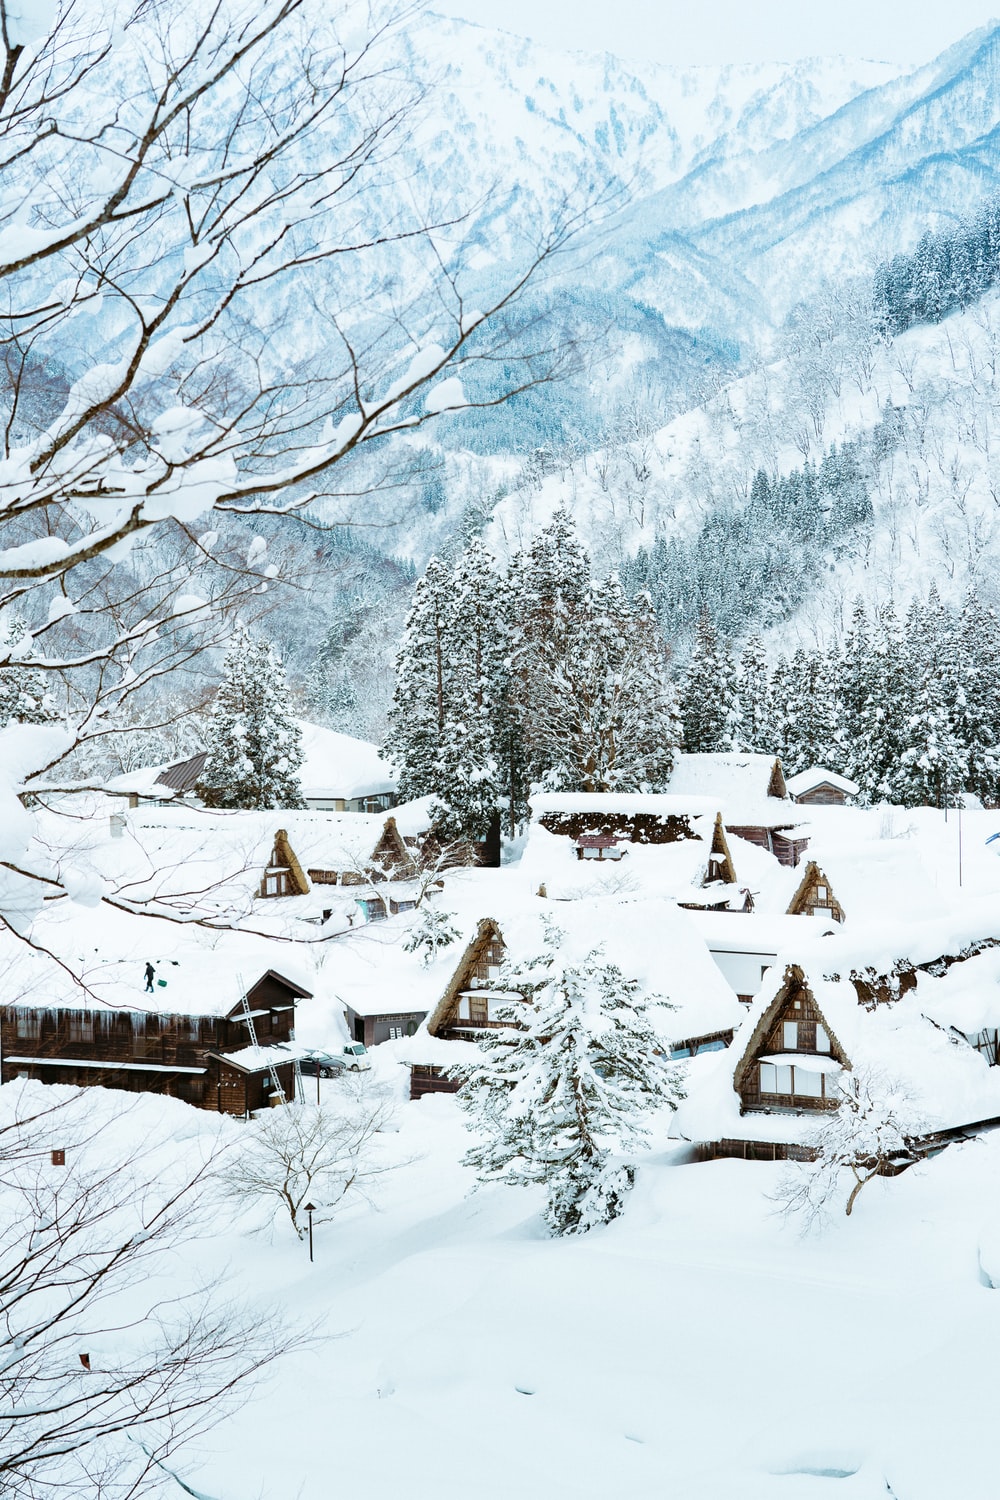 Winter Village Picture. Download Free Image